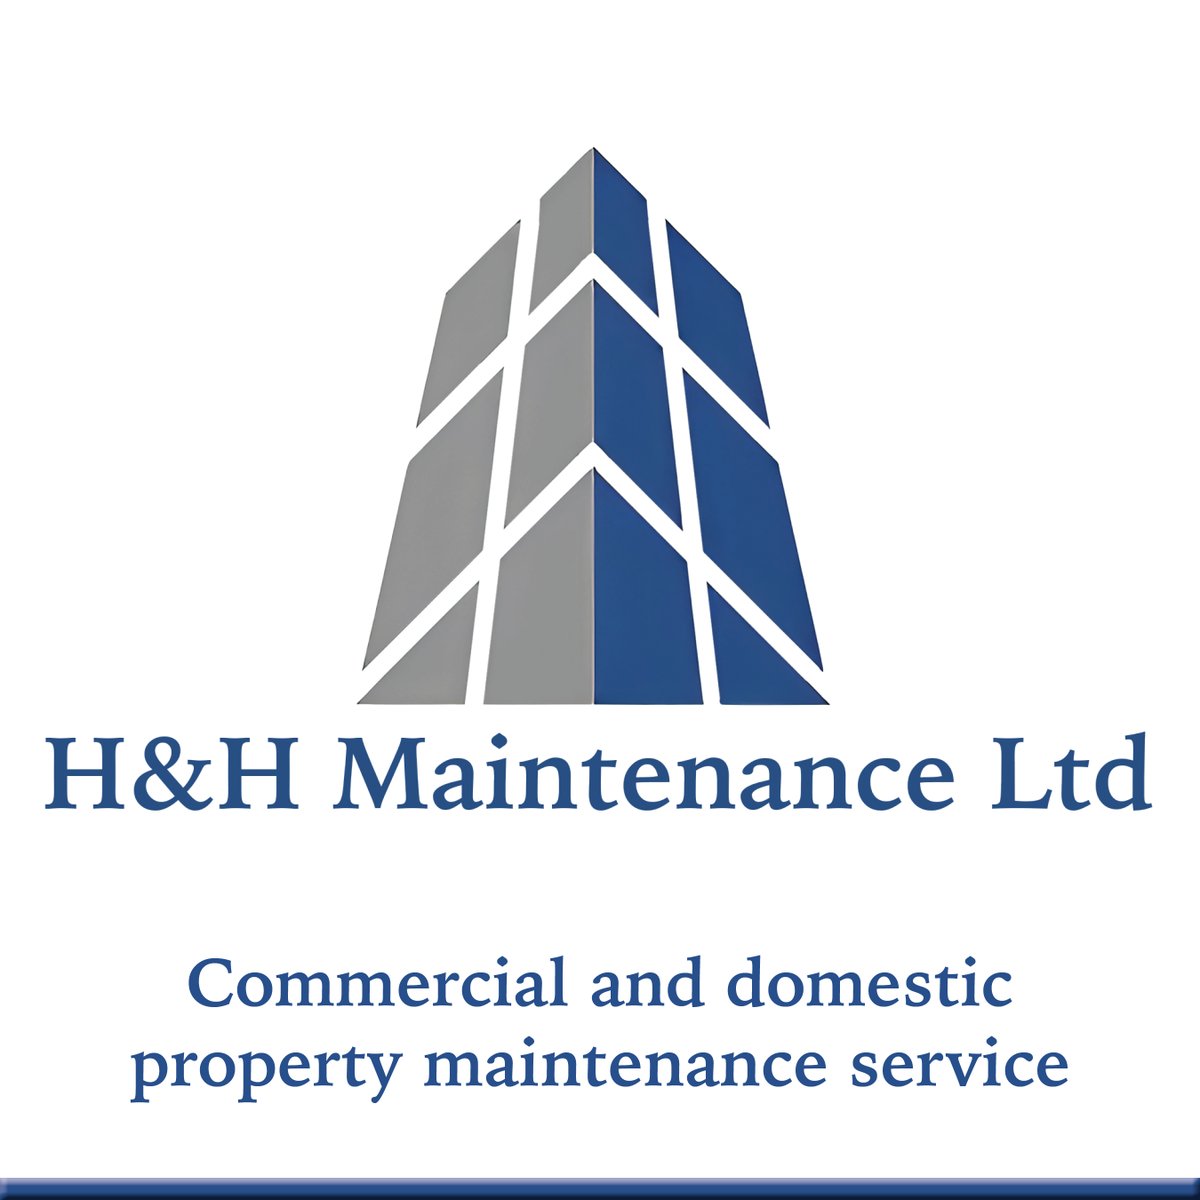 Welcome to the newest Belfry resident in Tower House, H&H Maintenance 🛠️ H&H Maintenance is a one-stop, high-quality & comprehensive property maintenance service. If you have any property maintenance requirements contact them at info@handhmaintenance.co.uk or 07913 299 496